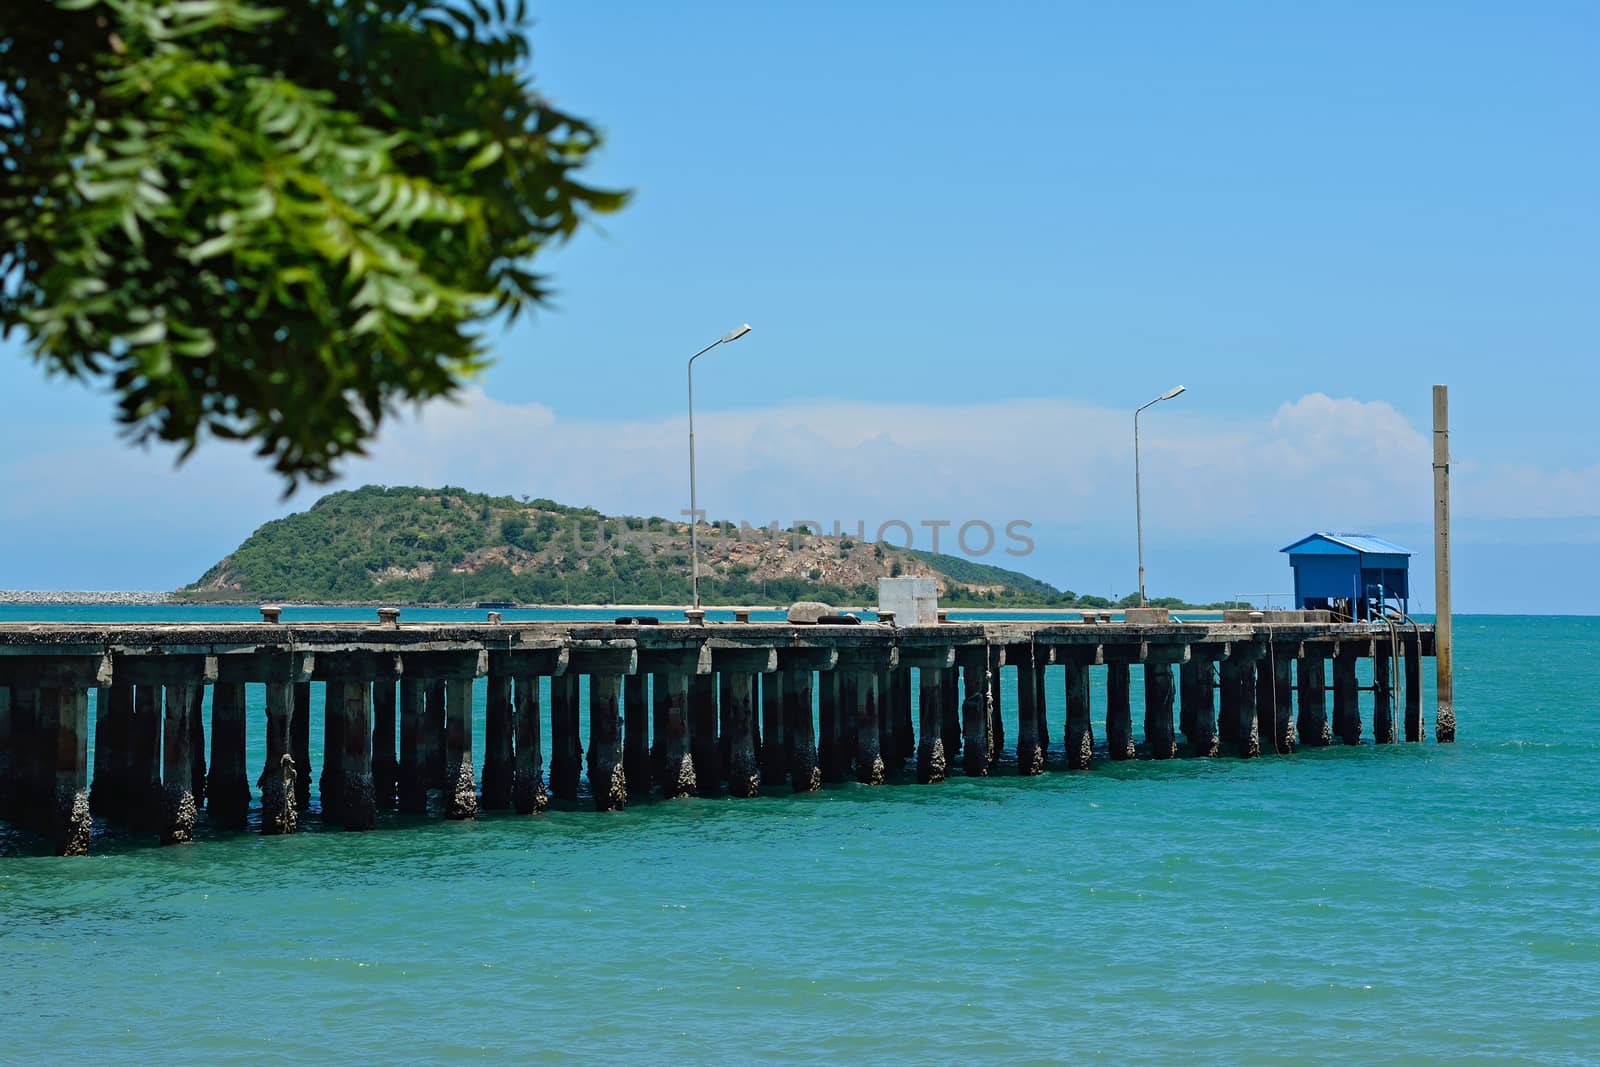 Fishing bridge in the sea of Thailand by think4photop